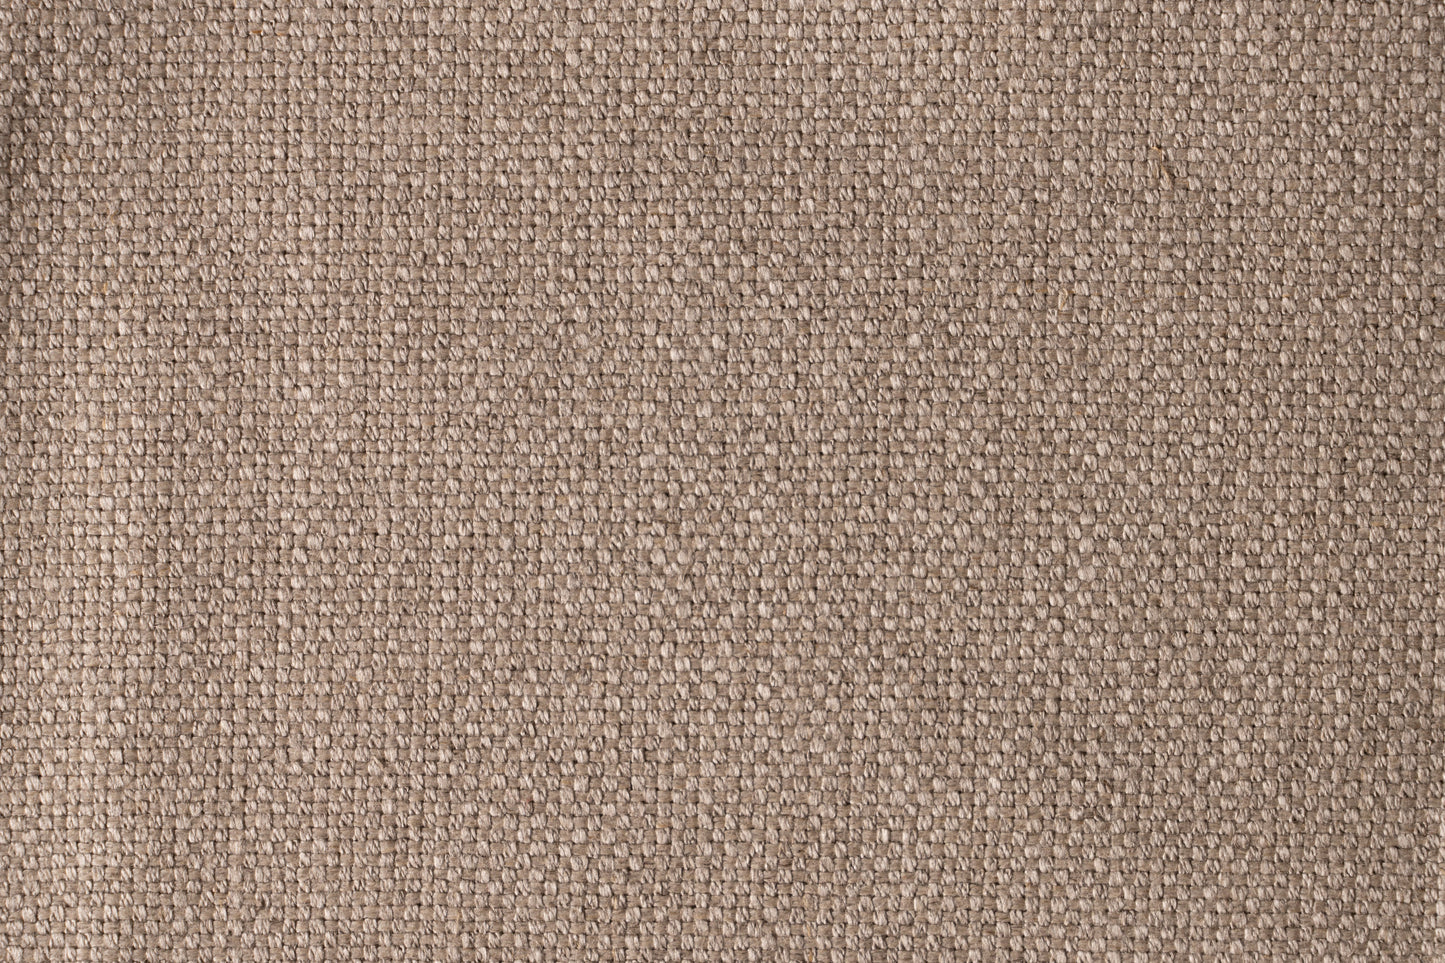 14.5 oz/sq yard 100% Upholstery Weight Linen in Natural Swatch